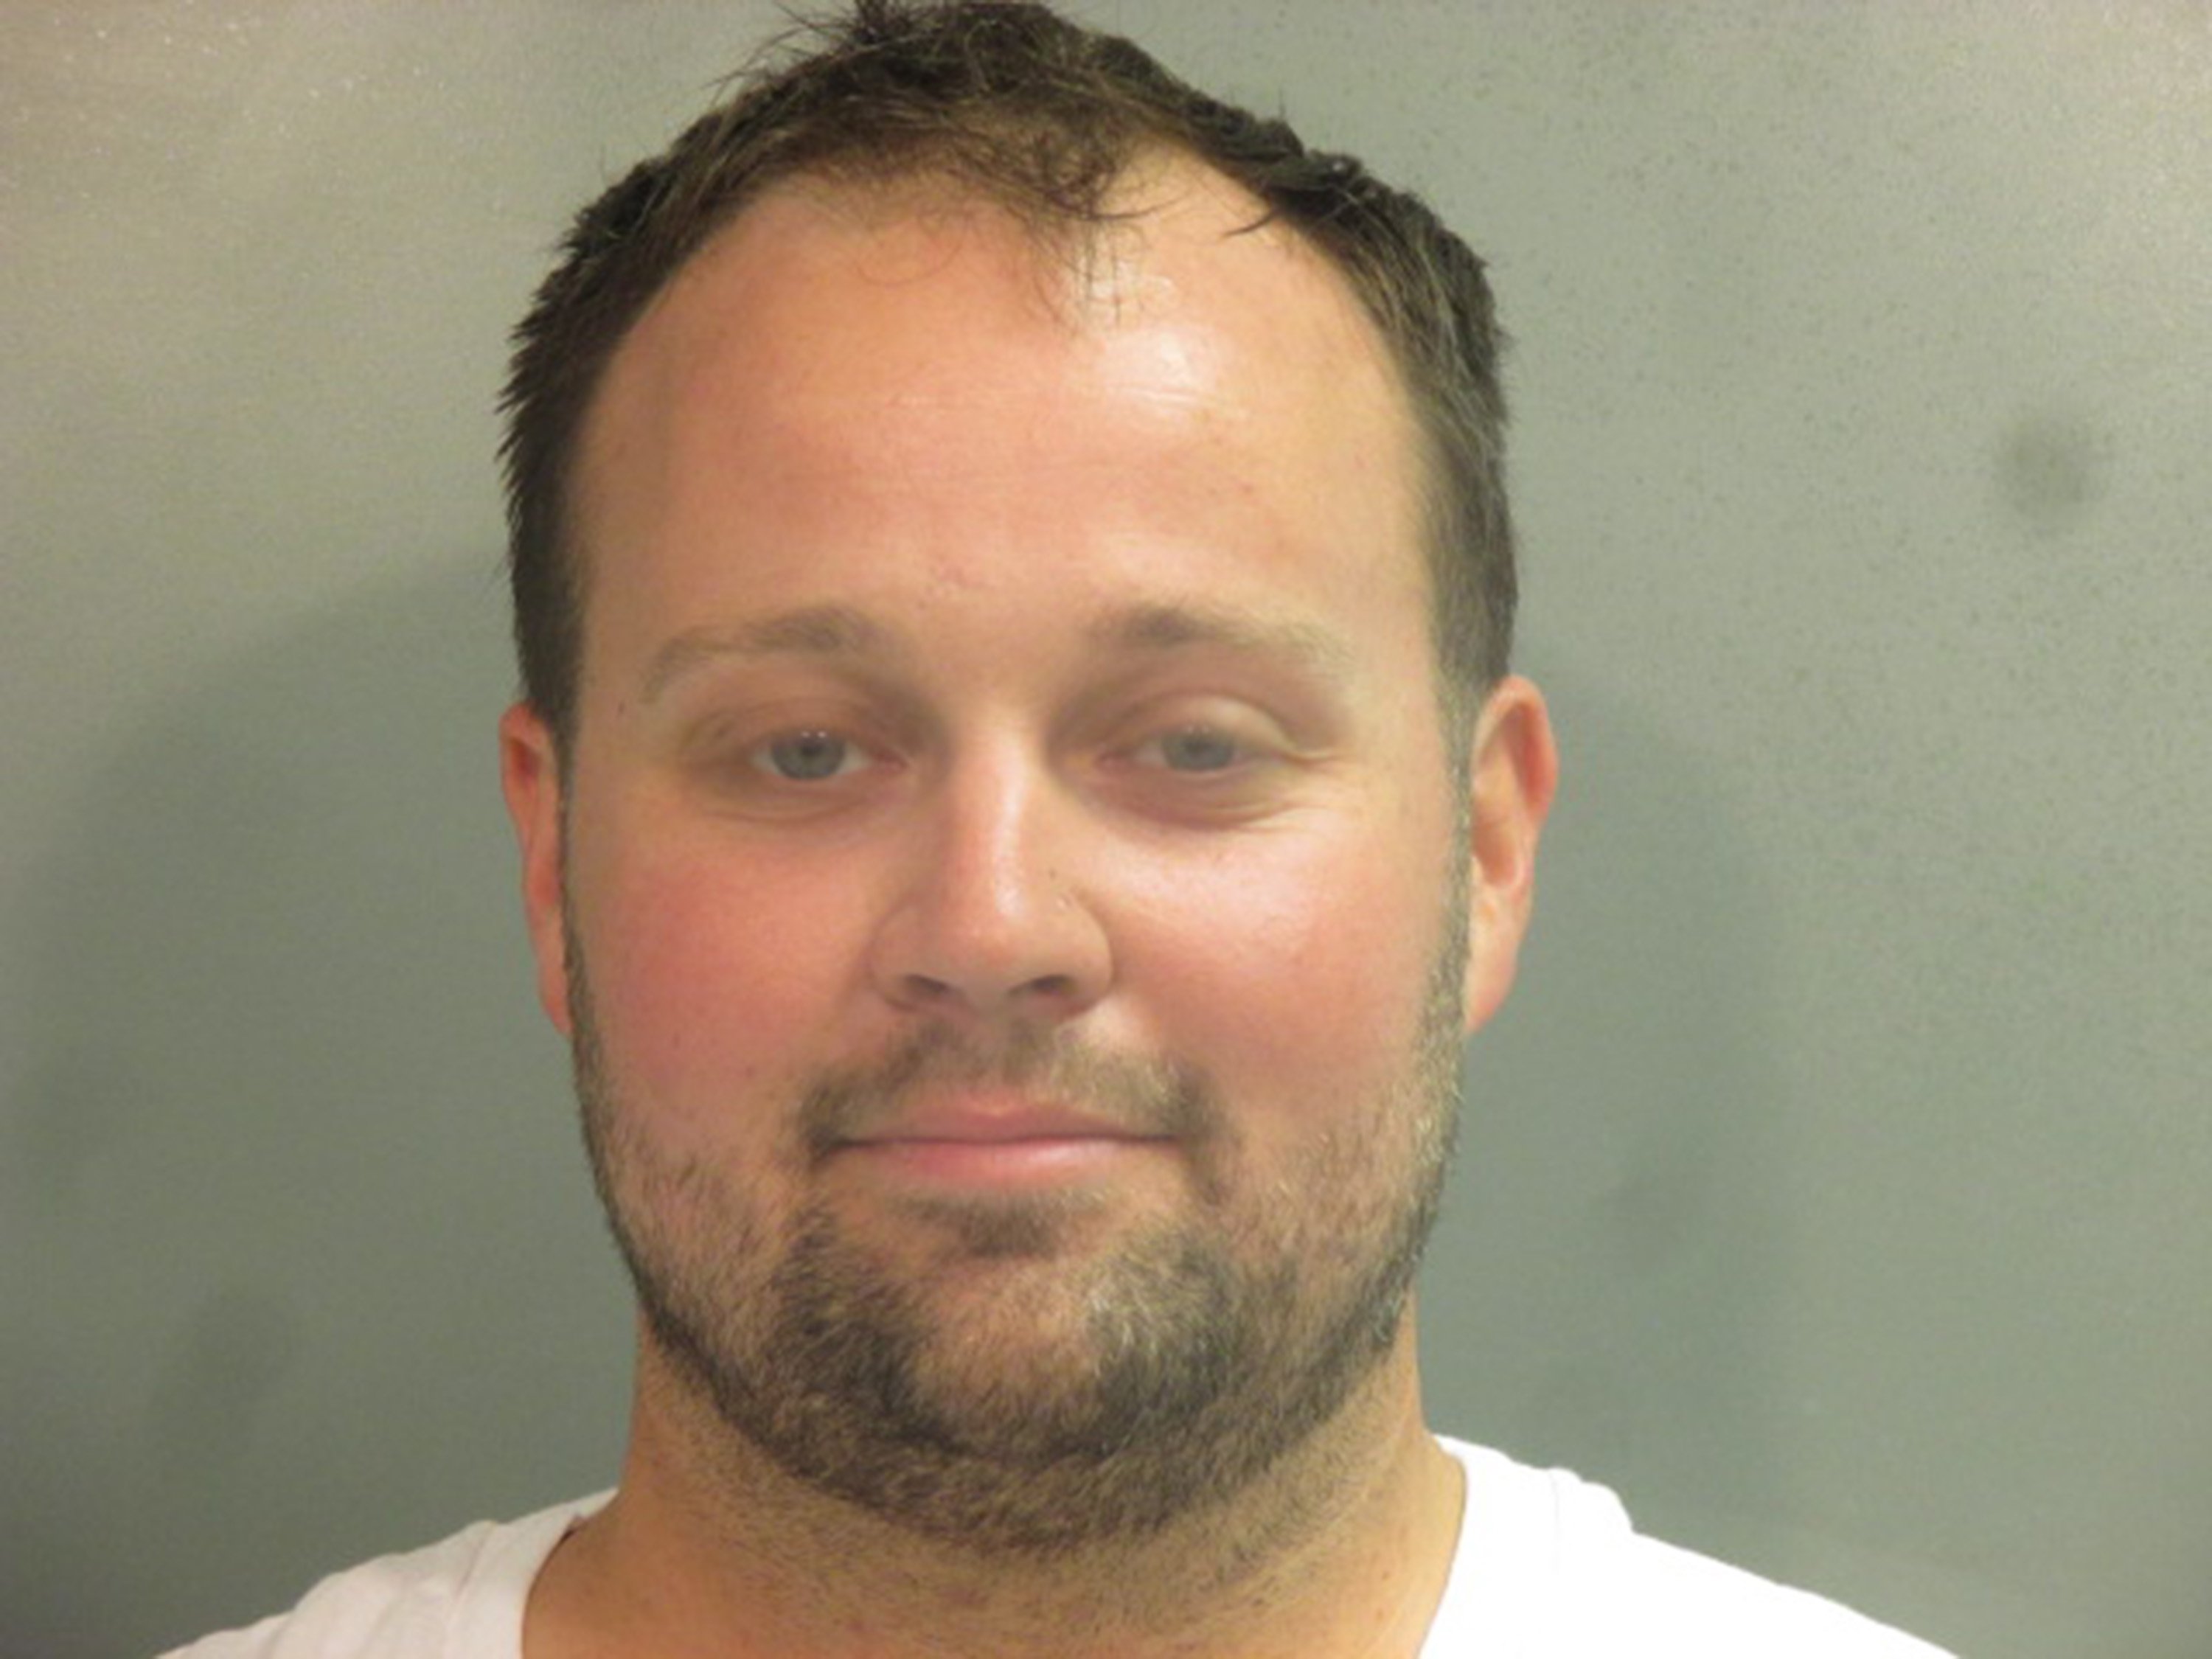 Josh Duggar stands for a booking photo after his April 2021 arrest. Josh Duggar's trial ended with a guilty verdict